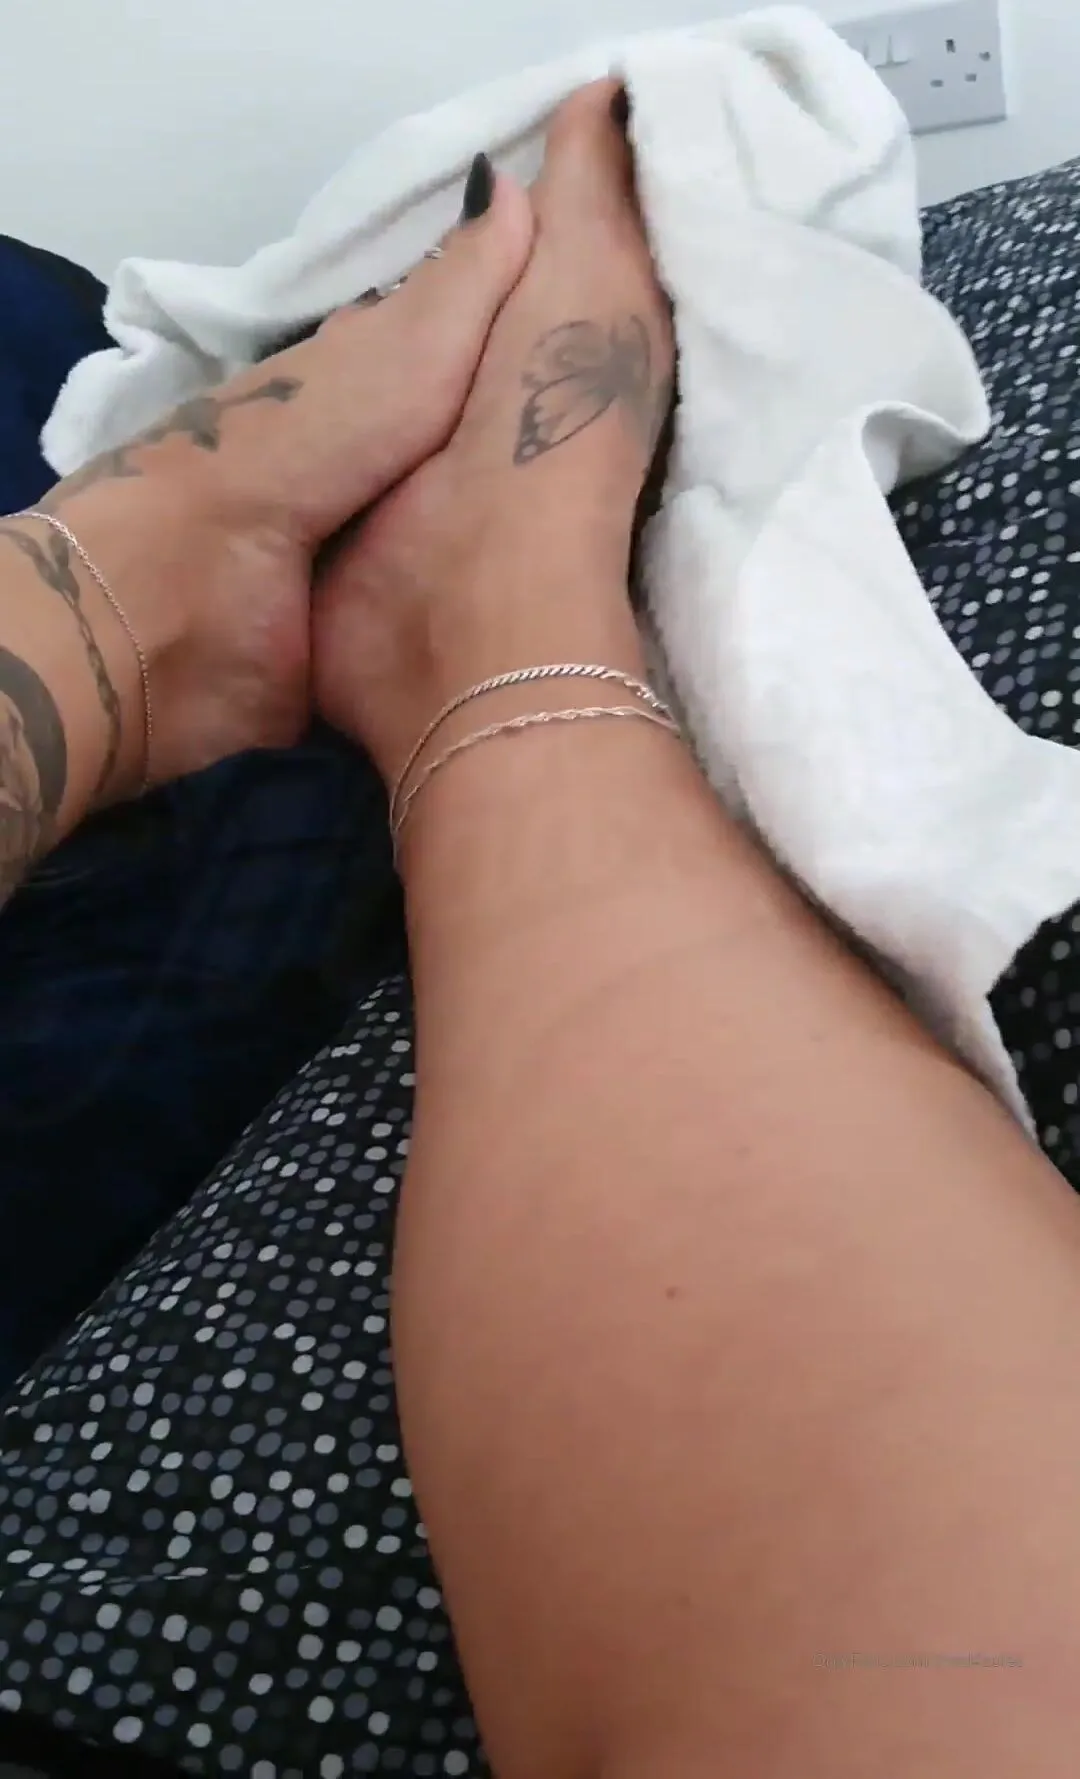 Madsoles loved his first face slapping session with wanted more and decided come back xxx onlyfans porn videos